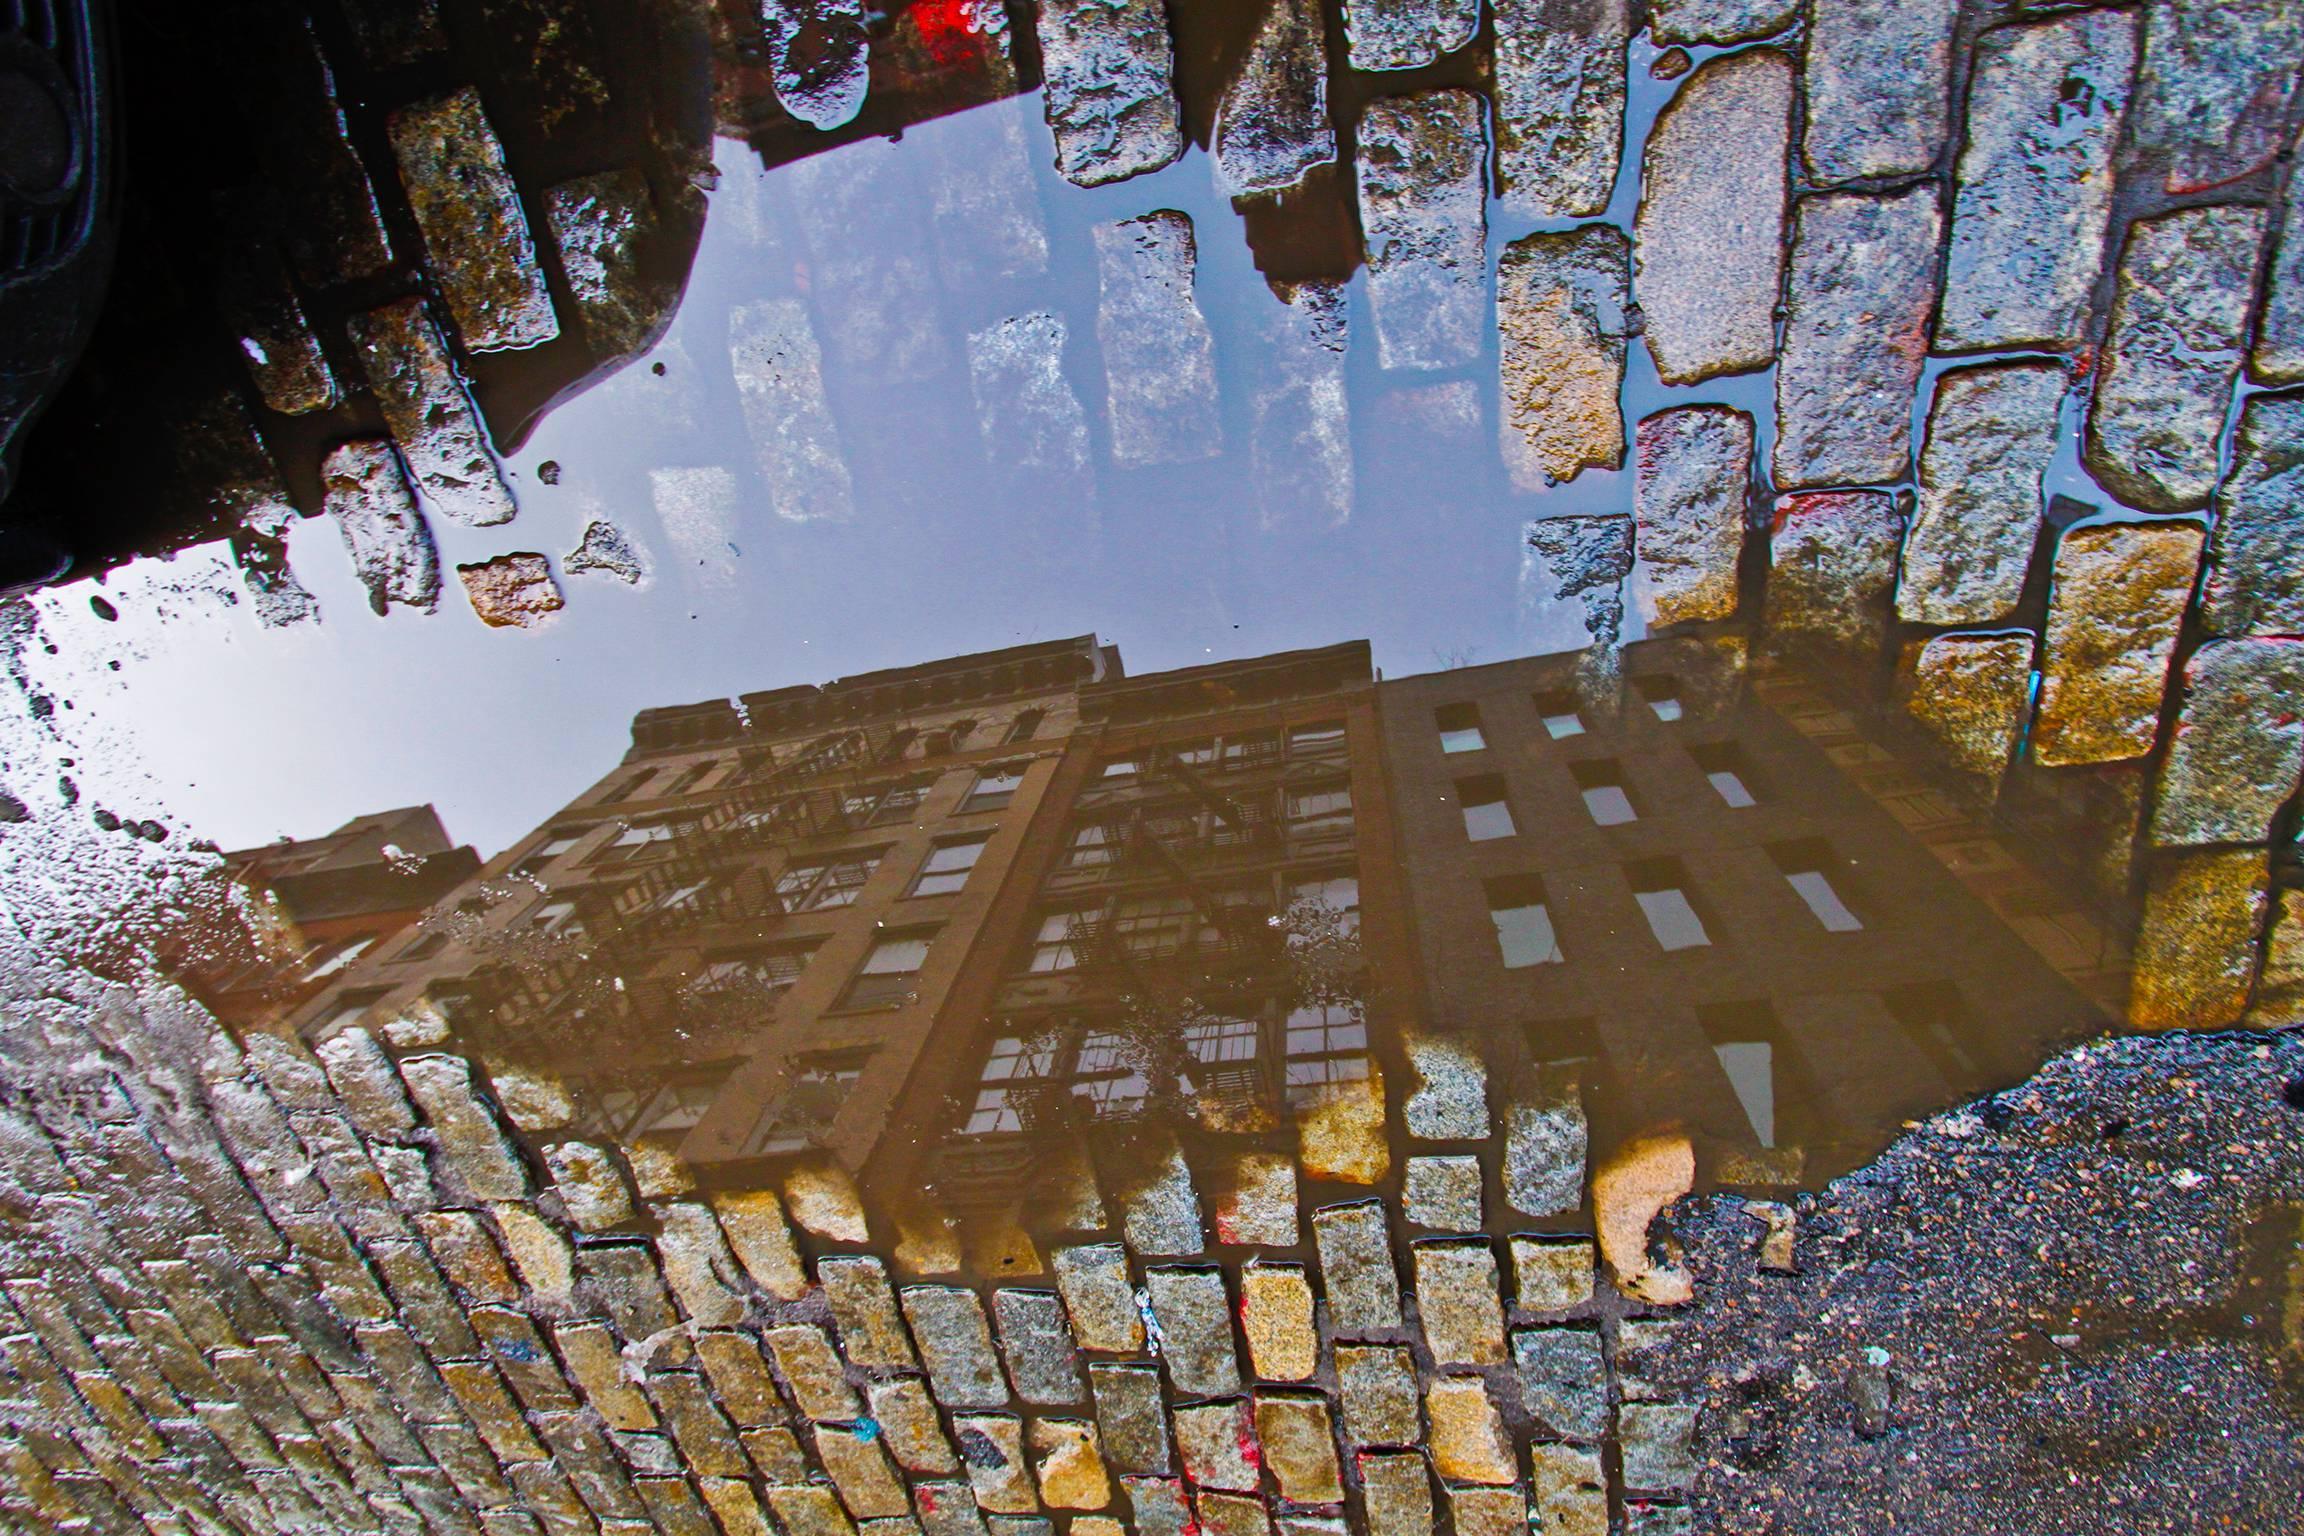 Yancy Clete Christopher Color Photograph - Crosby Street, 2010 buildings reflecting in a water puddle New York in Soho